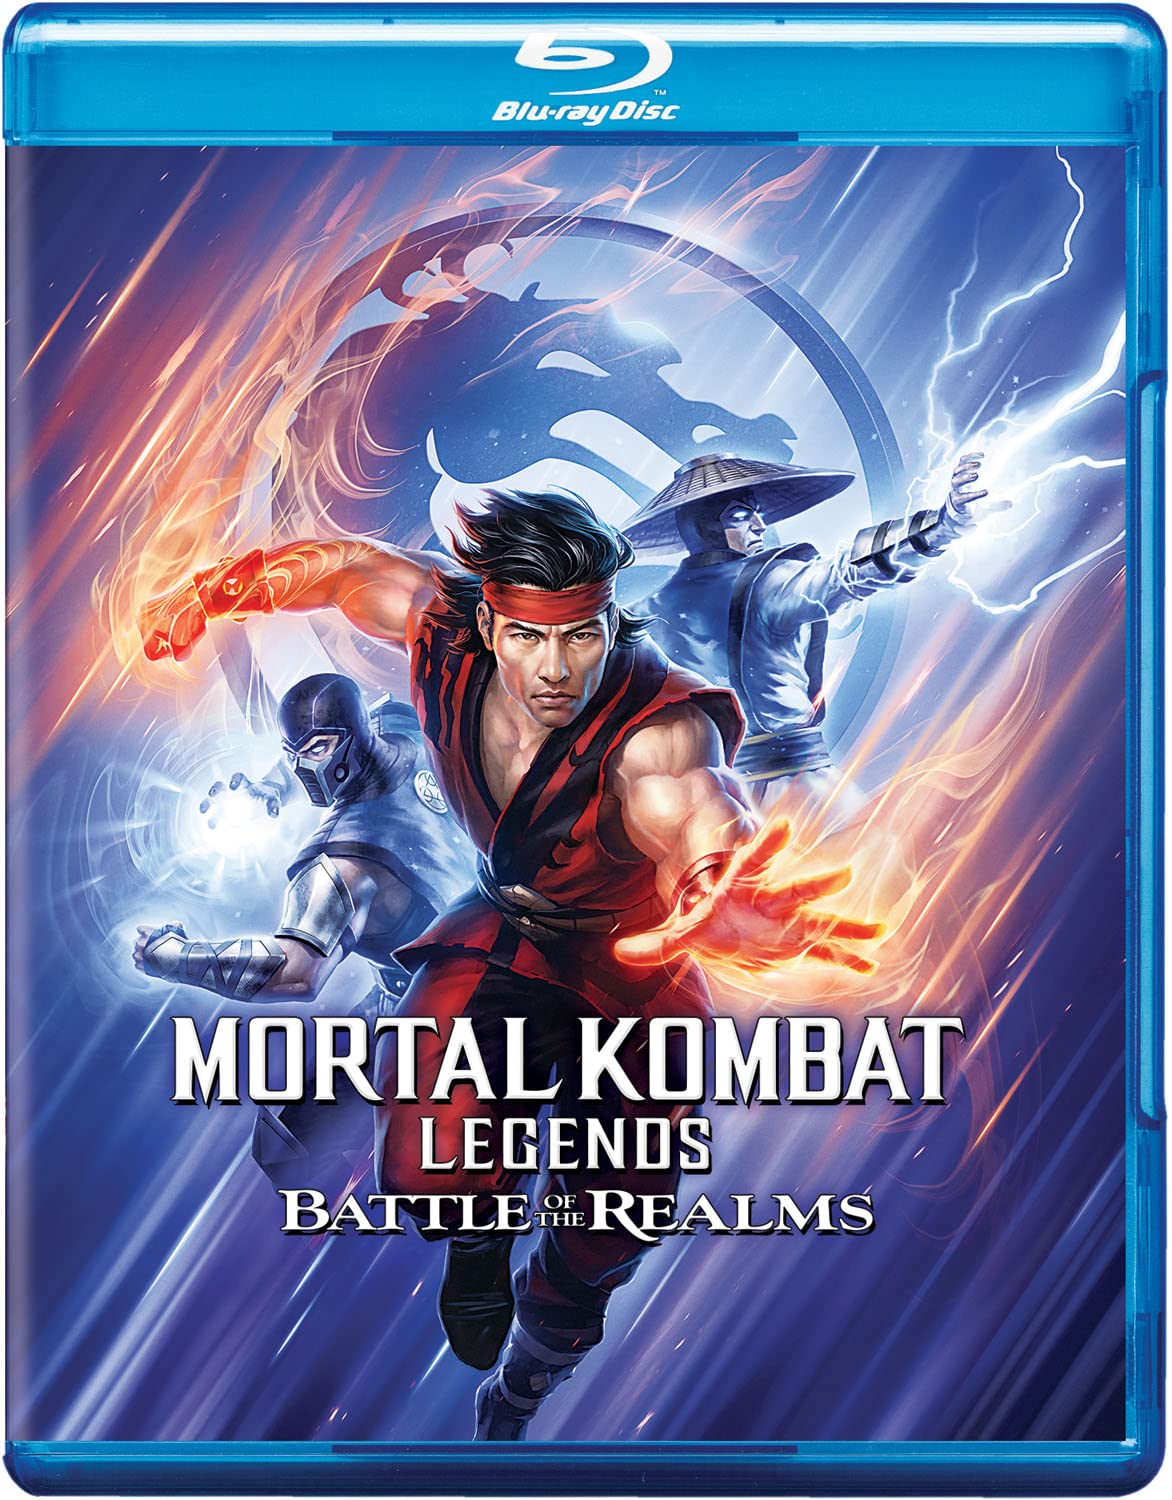 Mortal Kombat Legends: Battle Of The Realms - Blu-ray [ 2021 ]  - Animation Movies On Blu-ray - Movies On GRUV